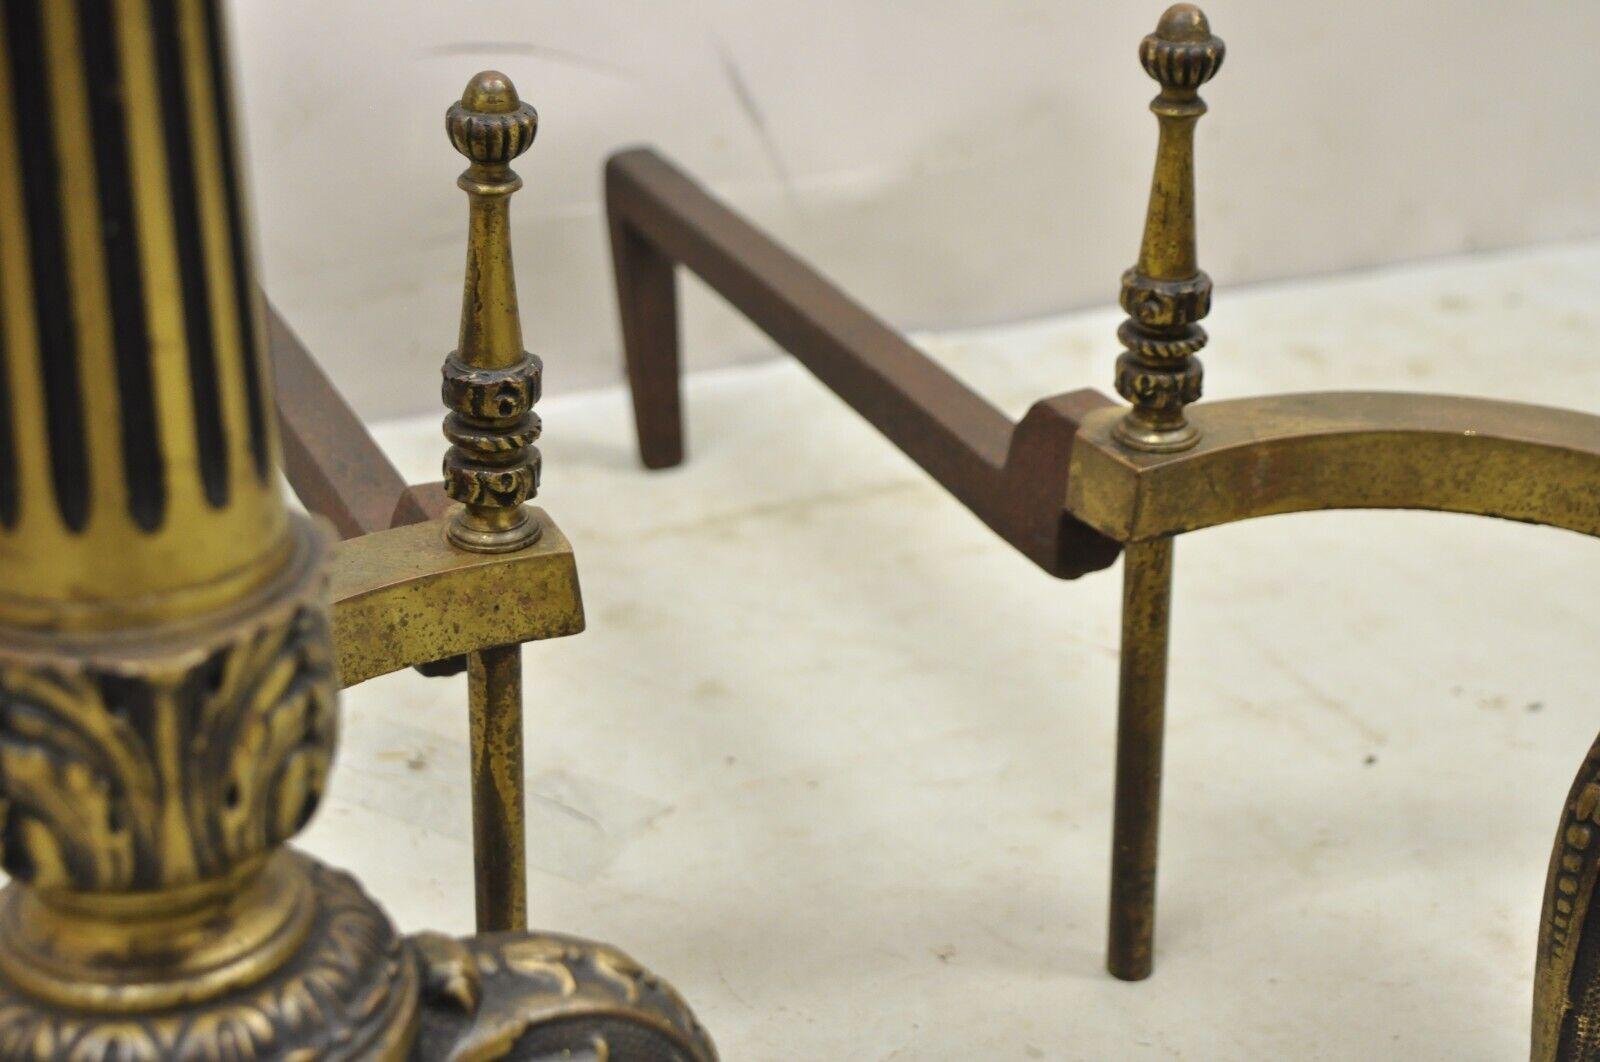 Antique French Empire Style Bronze Column Form Flame Finial Andirons - a Pair For Sale 5